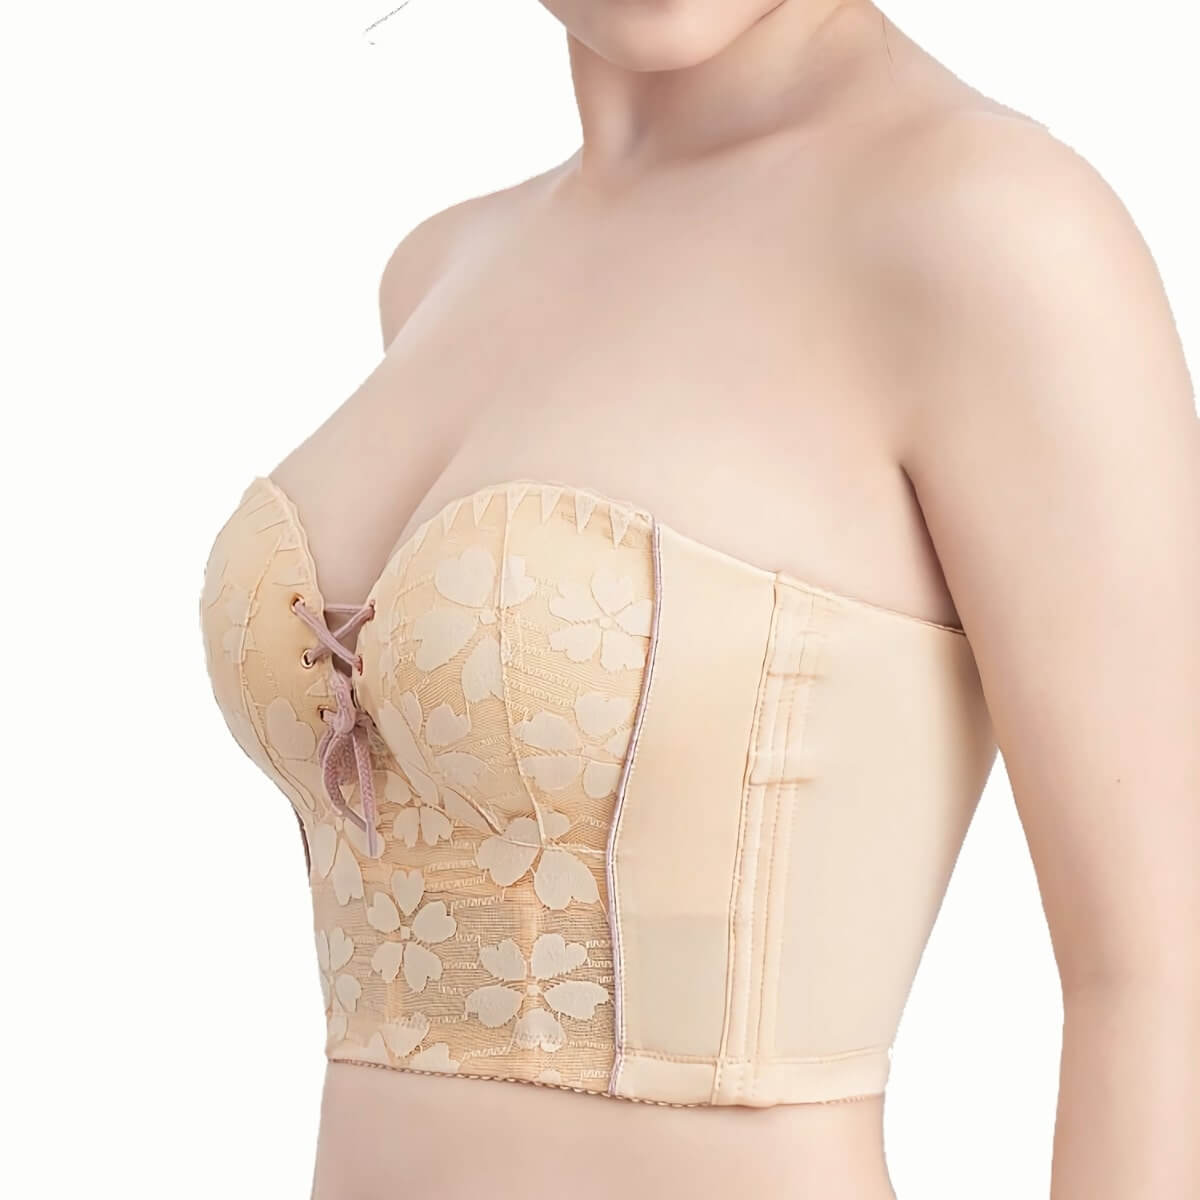 Exquisite Lotus Embroidered Lace Floral Bra Panty Set Ultra Thin